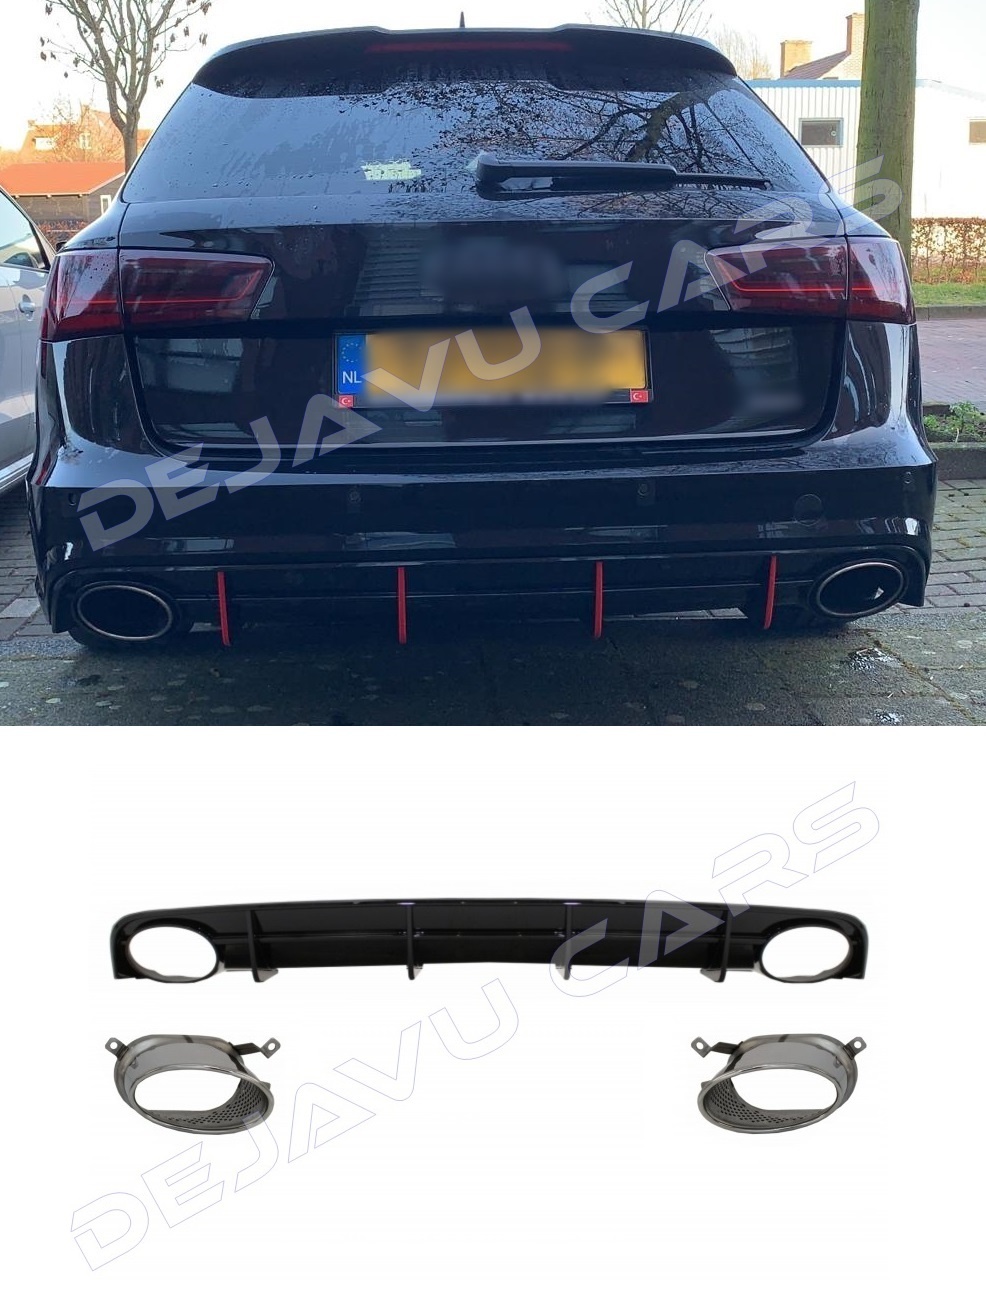 RS6 Look Diffuser for Audi A6 C7.5 Facelift S line / S6 - WWW